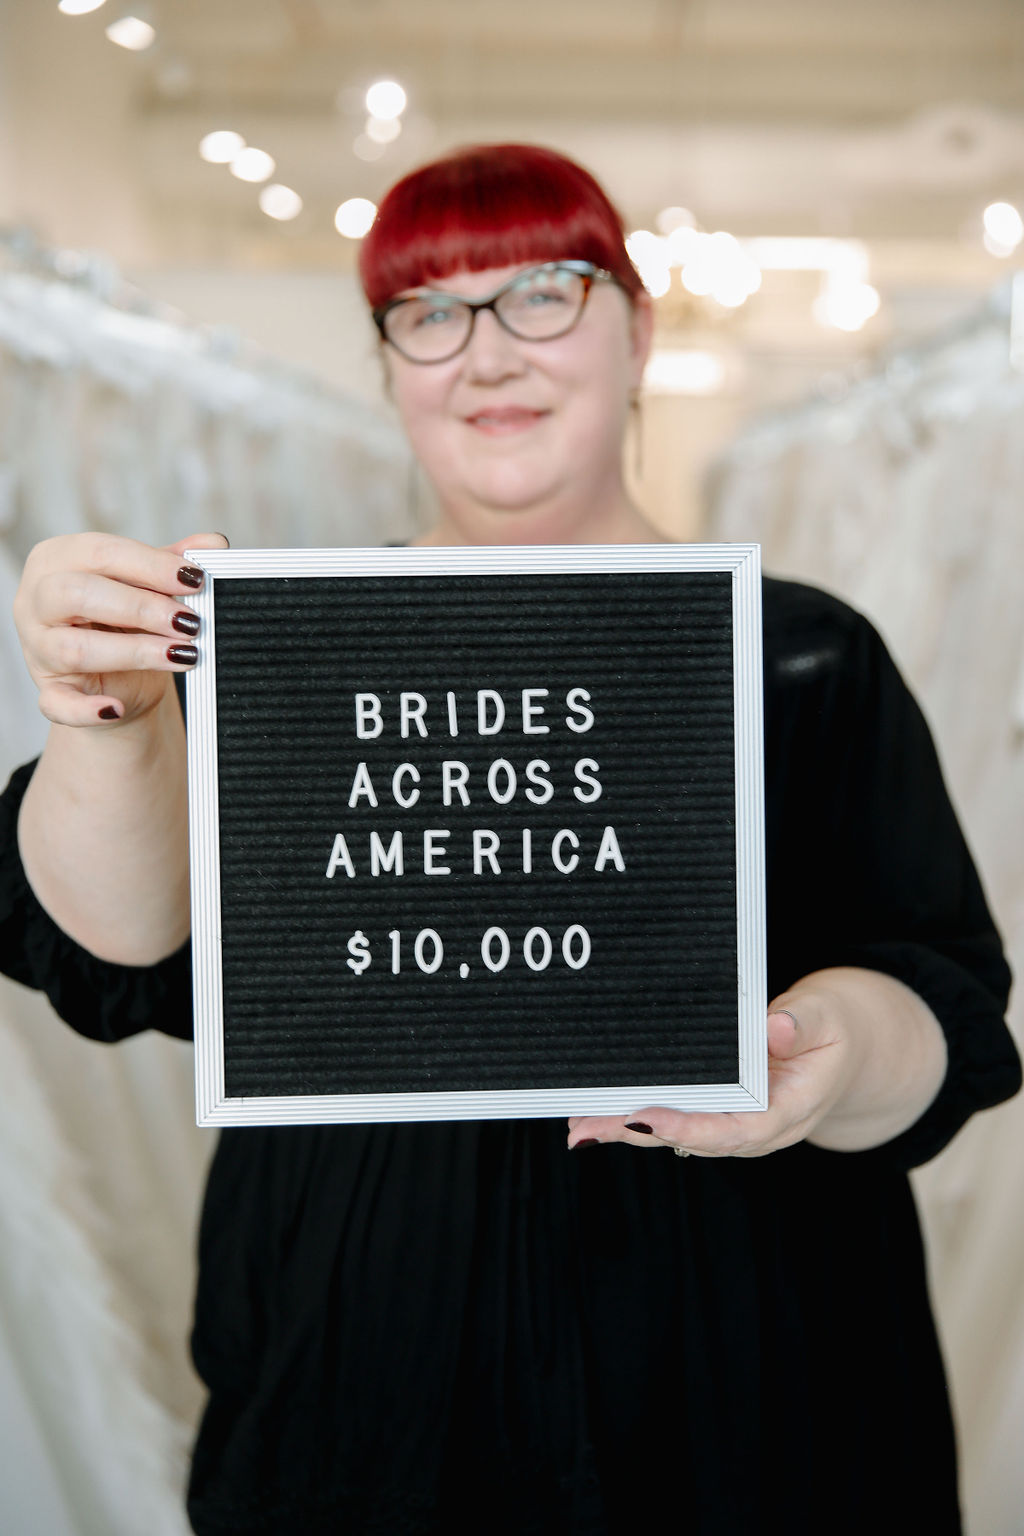 Brides Across America – November 2022 Giveaway Was a Success!